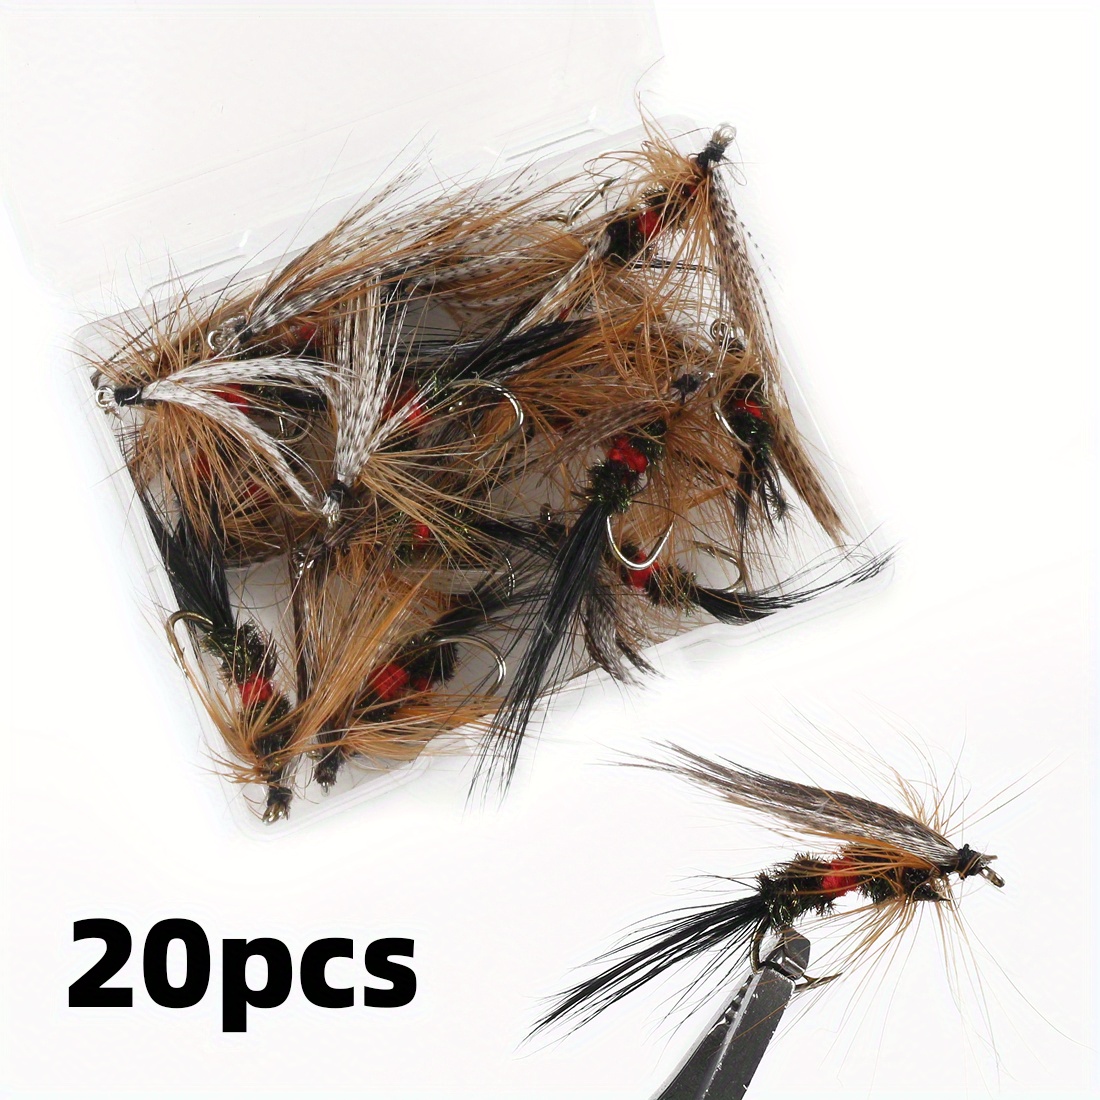 20pcs Premium Bionic Trout Flies - Effective Dry Fly Fishing Lures for  Trout Tackle - Lifelike Design for Realistic Bites